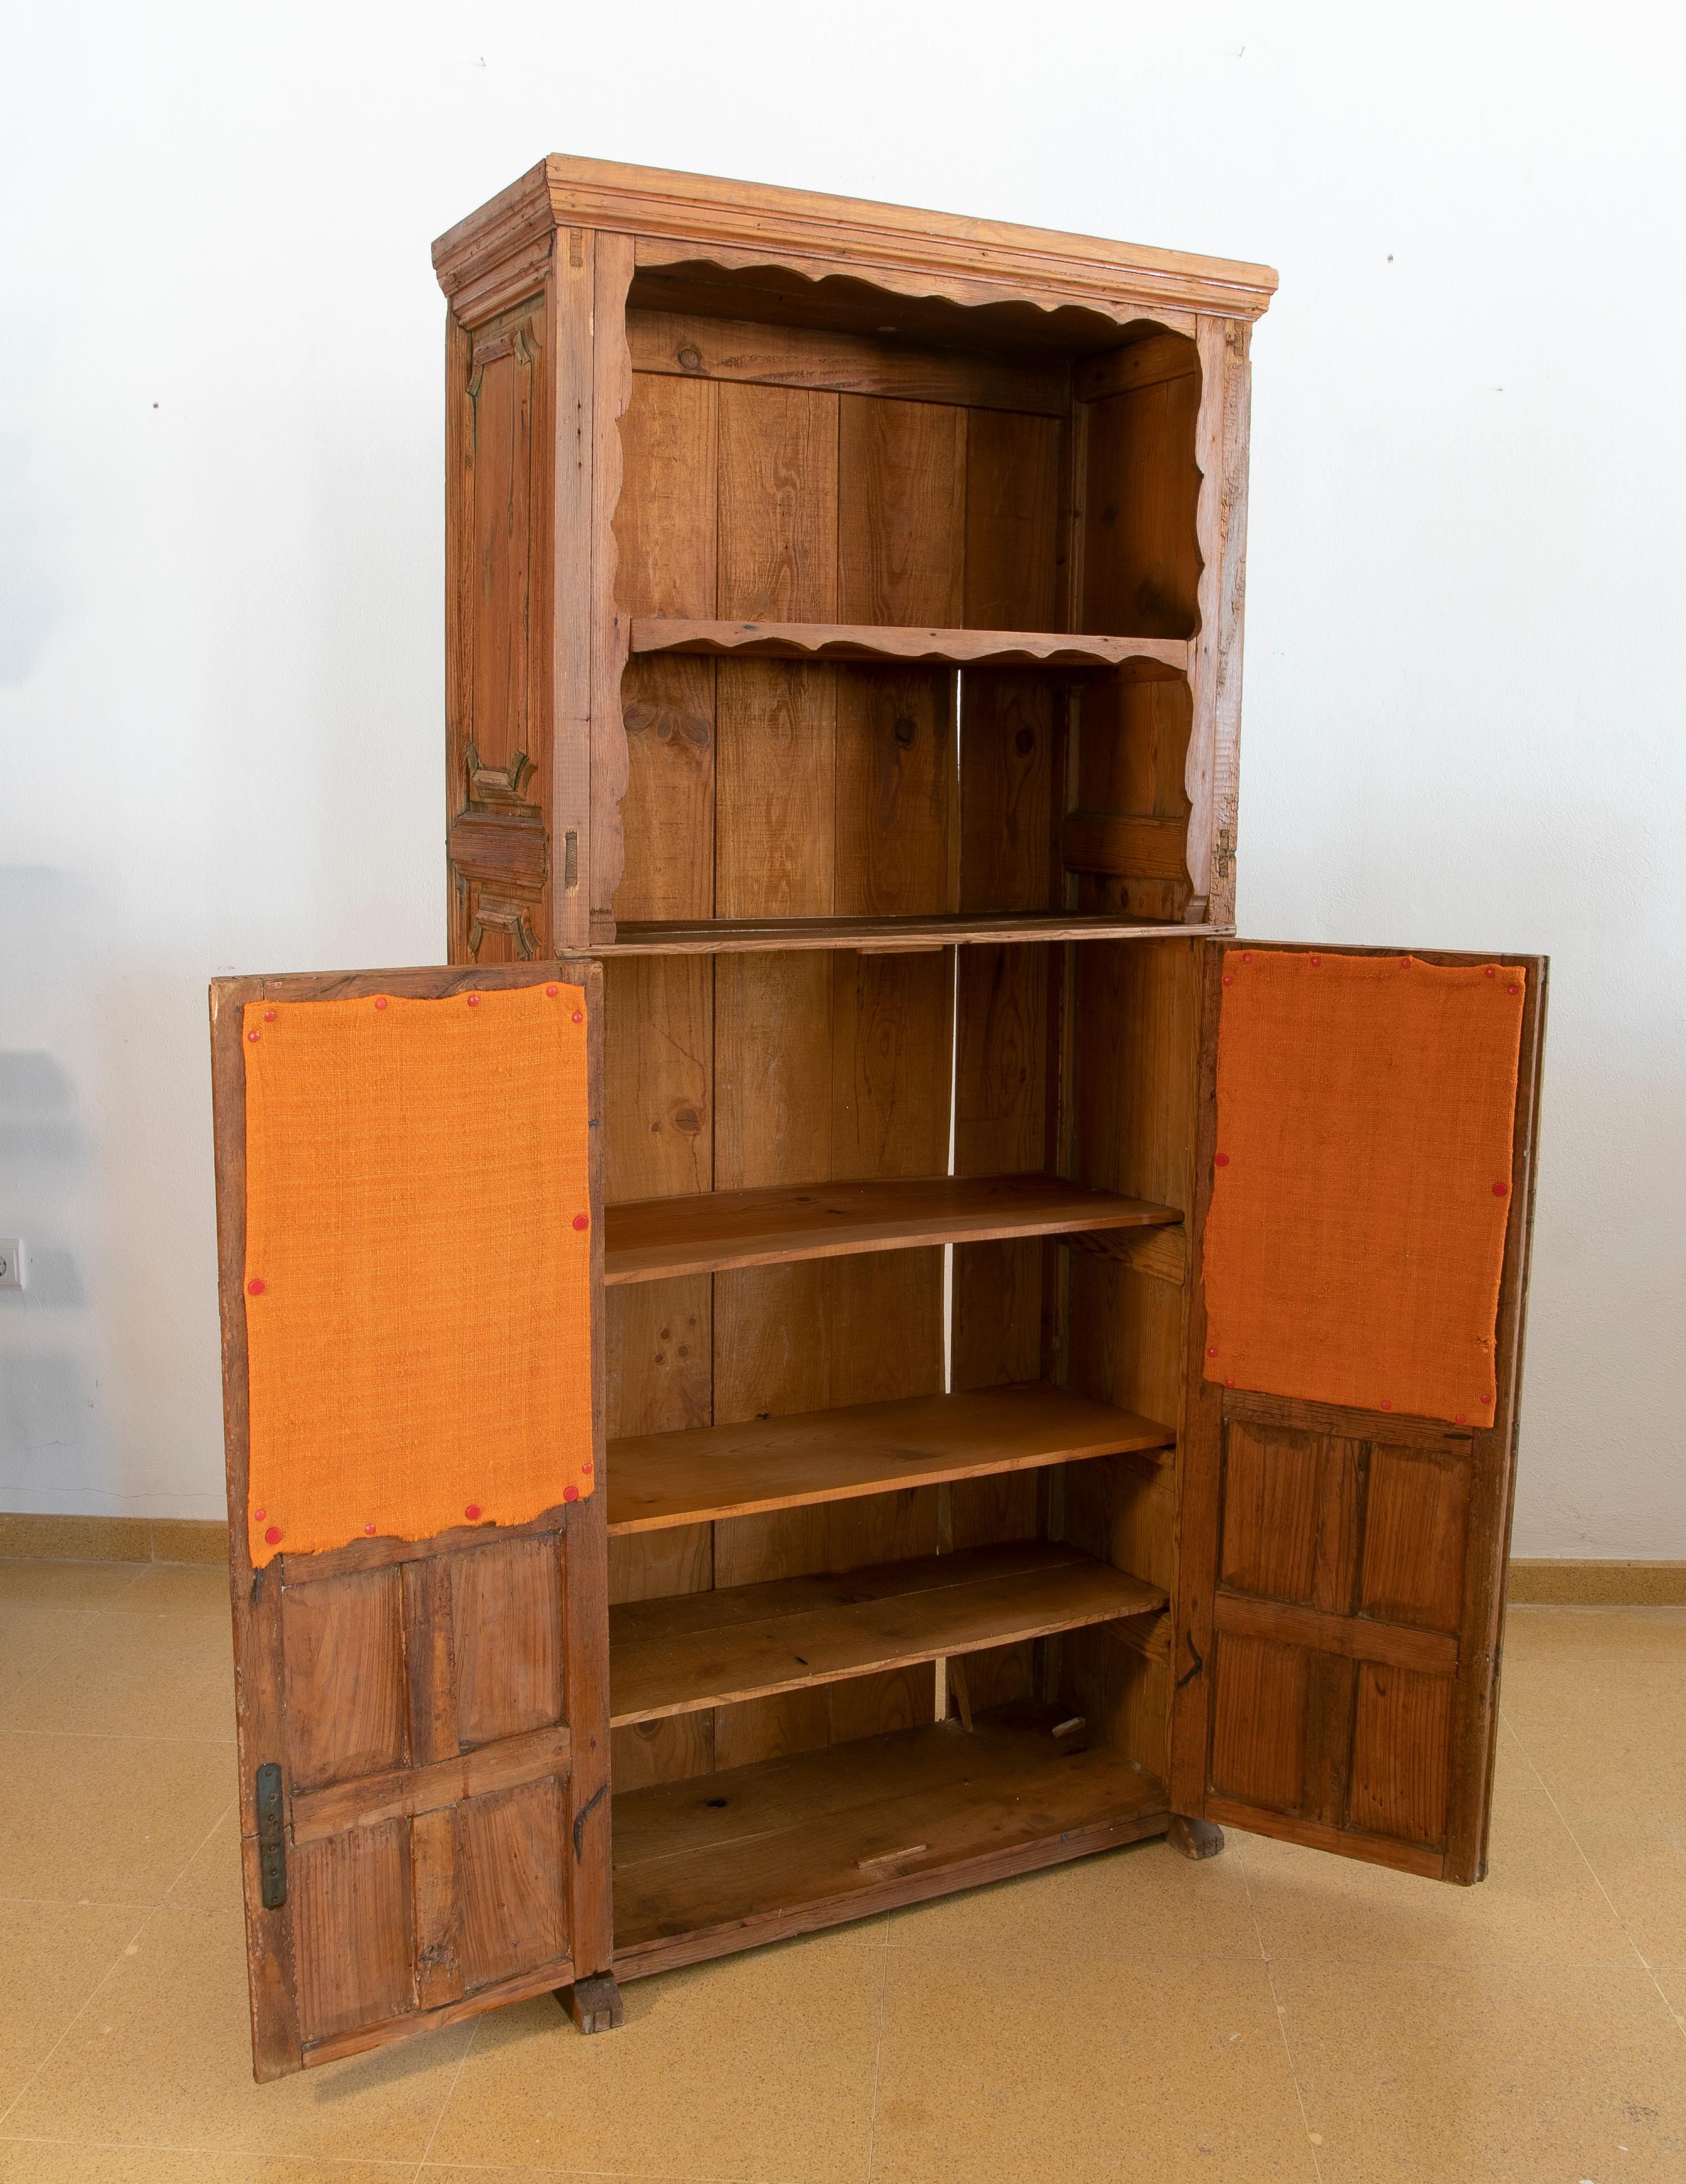 Spanish wooden cupboard with shelves and lattice doors.